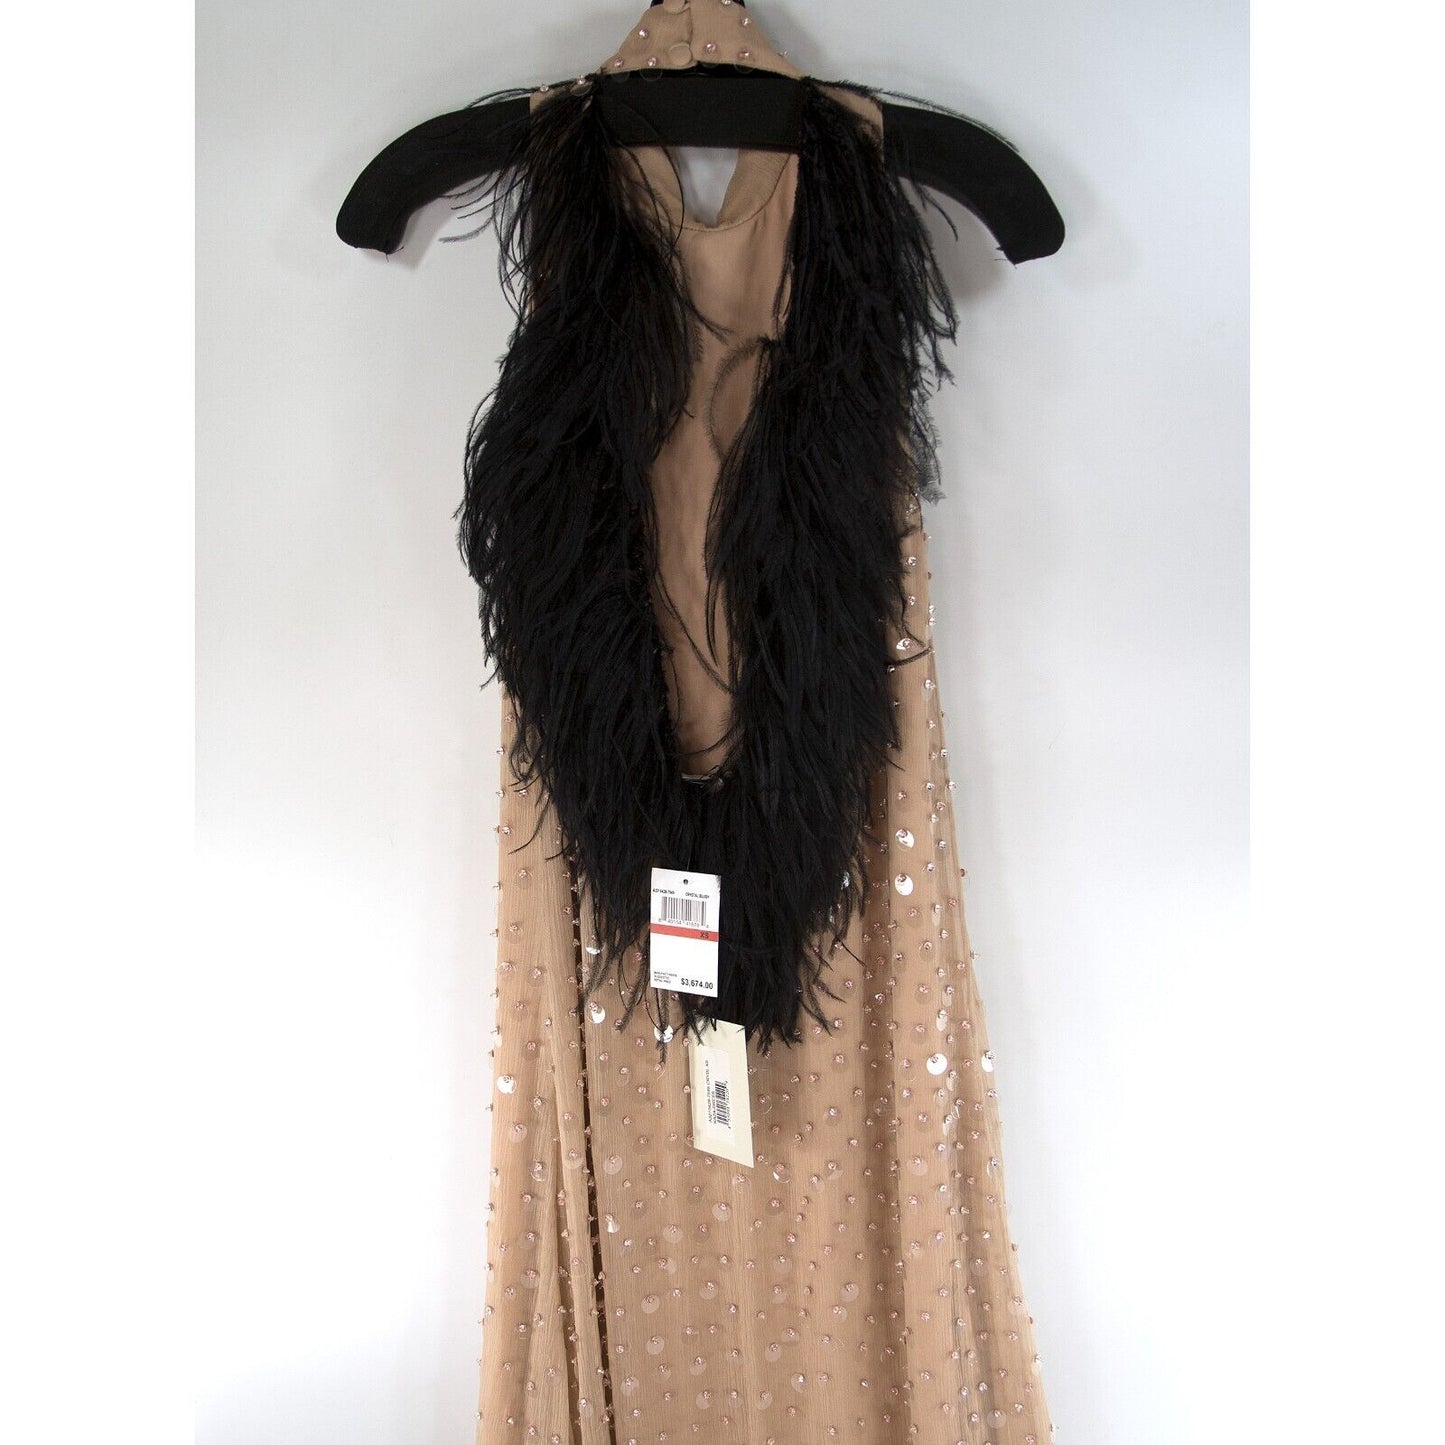 Alexis Kaza Blush Crystal Encrusted Feather Open Back Silk Gown XS NWT $3674